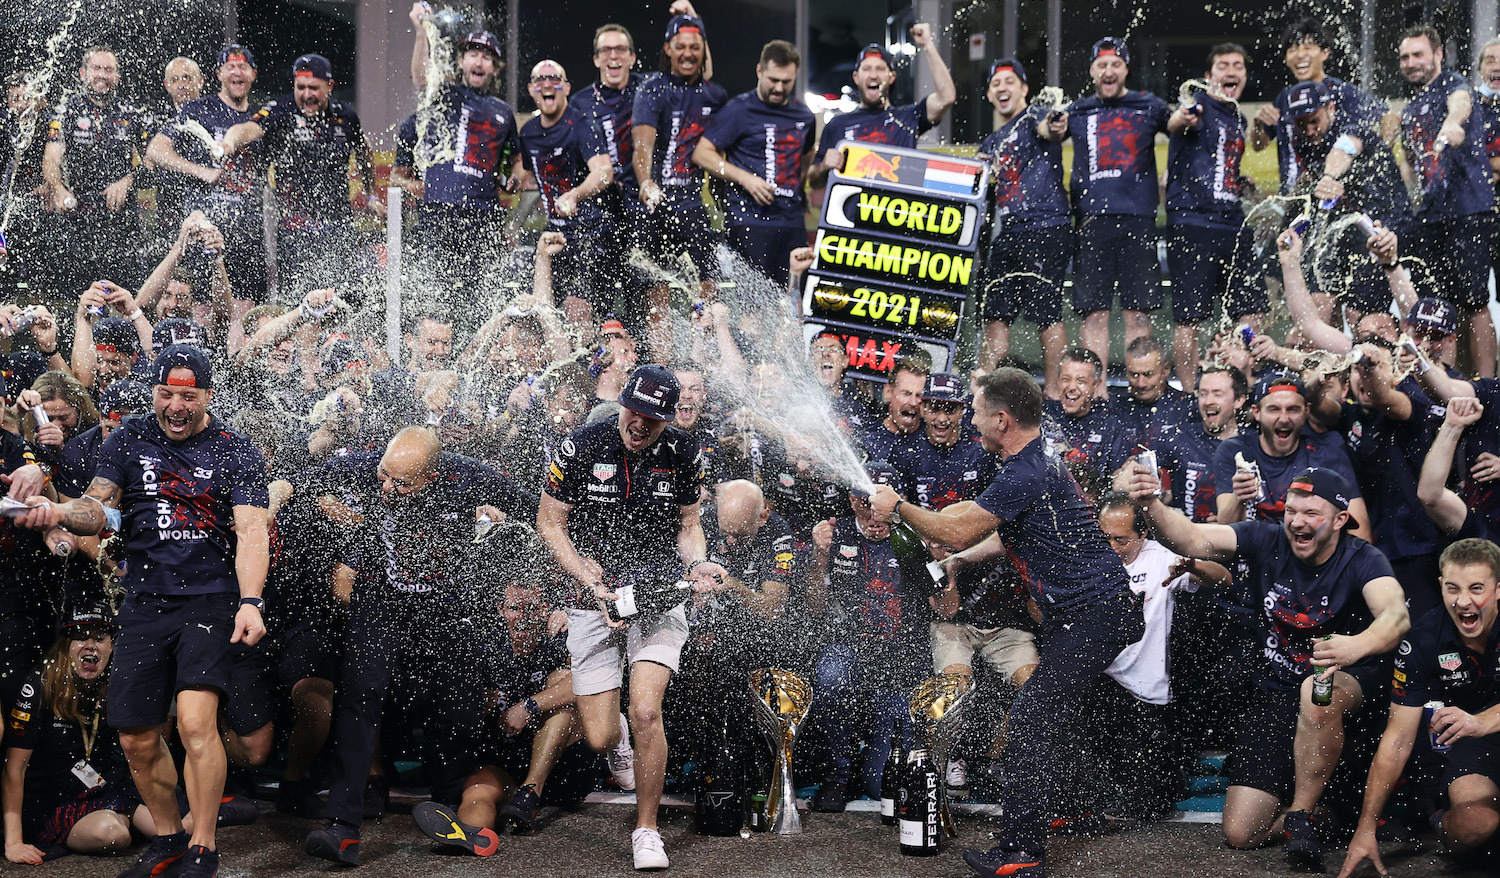 ABU DHABI, UNITED ARAB EMIRATES - DECEMBER 12: Race winner and 2021 F1 World Drivers Champion Max Verstappen of Netherlands and Red Bull Racing celebrates with his team after the F1 Grand Prix of Abu Dhabi at Yas Marina Circuit on December 12, 2021 in Abu Dhabi, United Arab Emirates. (Photo by Lars Baron/Getty Images)